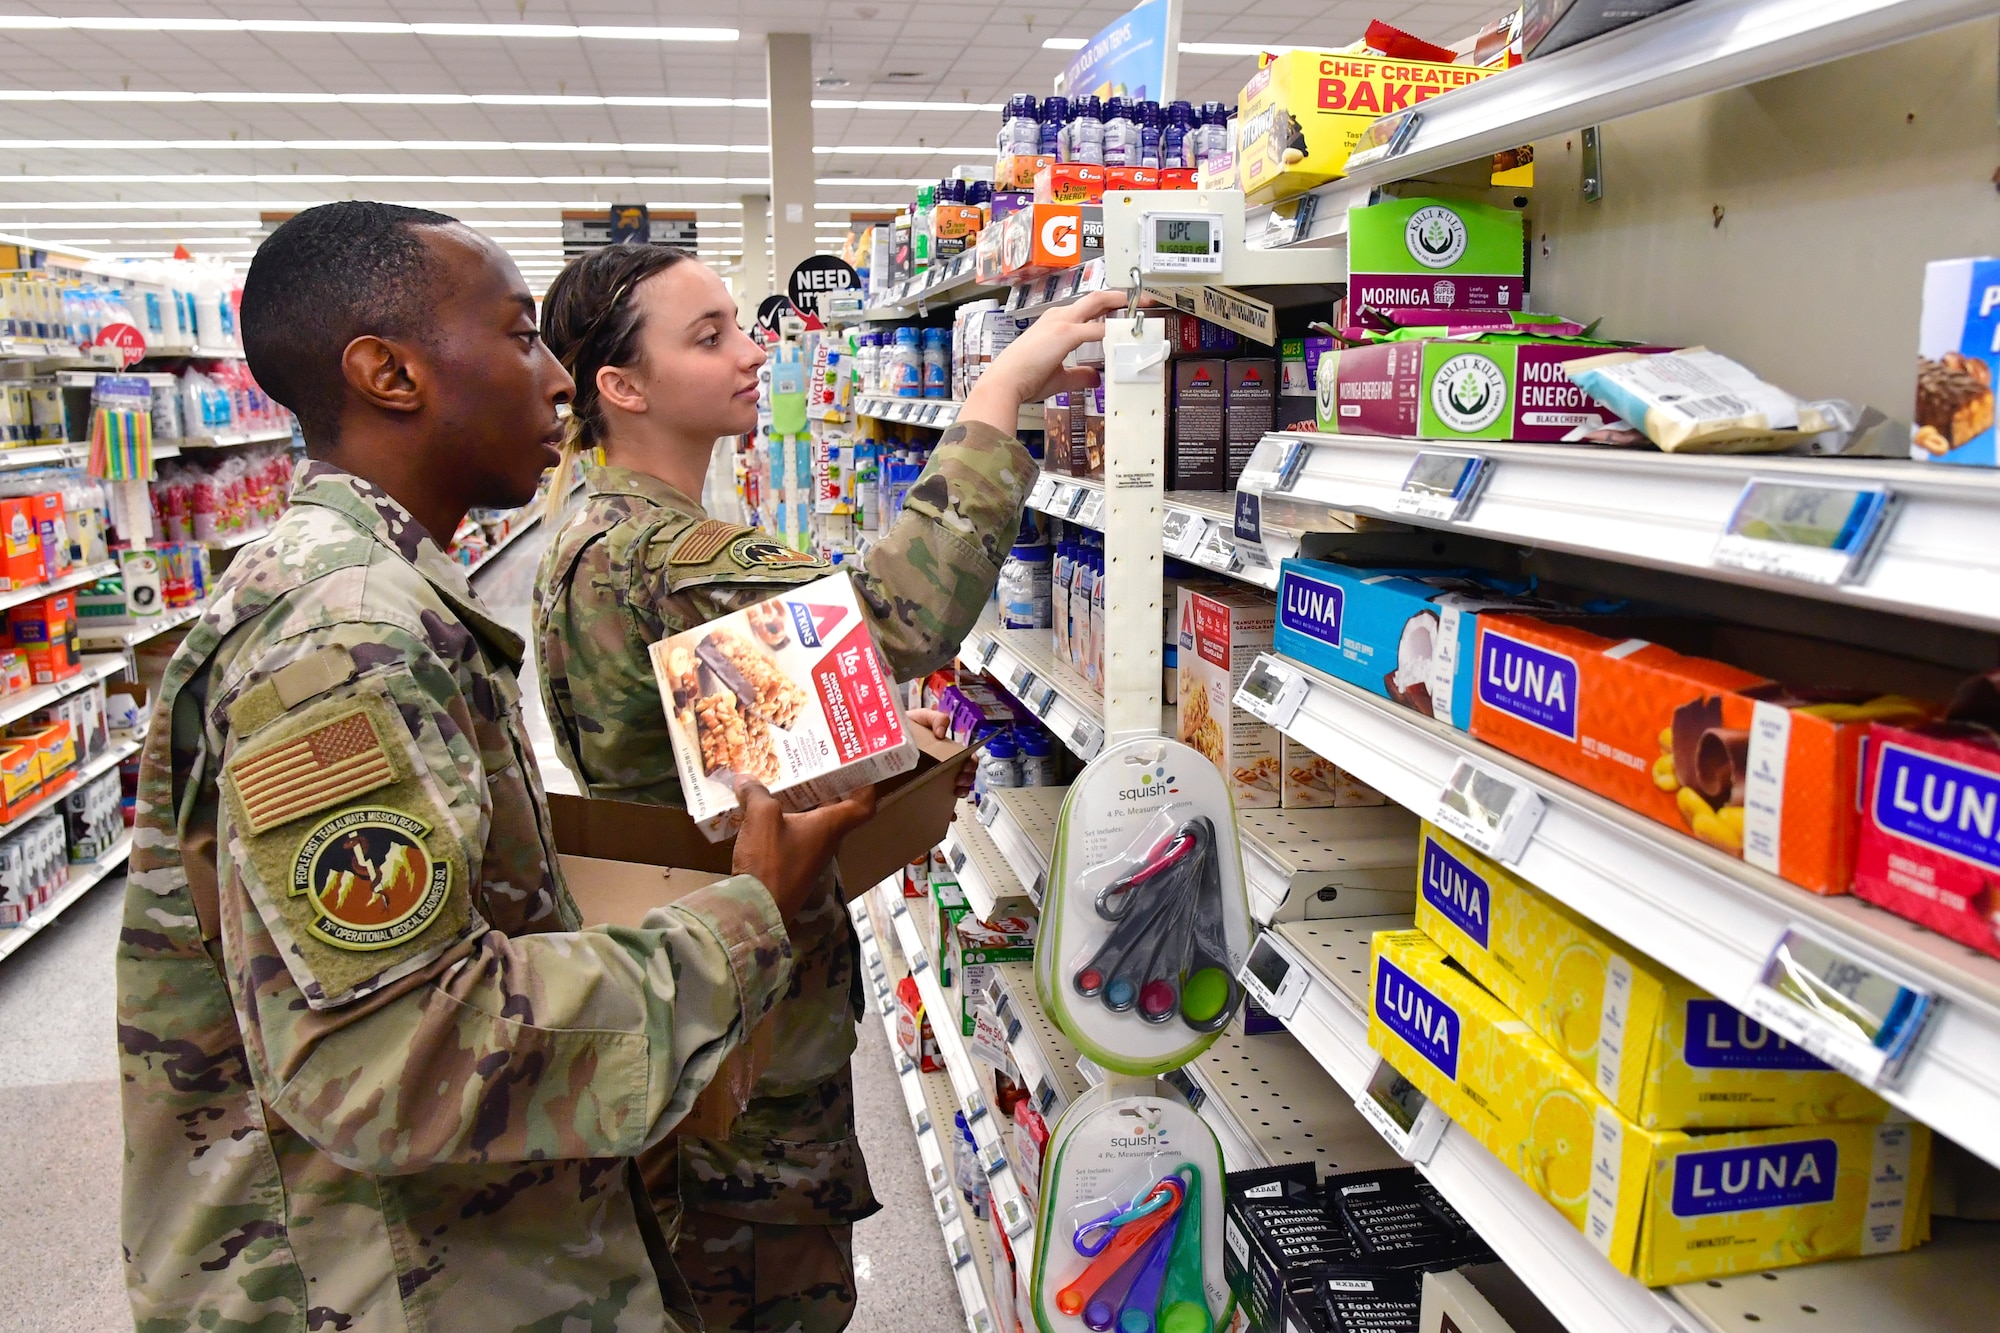 (Left to right) Senior Airman Donald Lamar and Airman 1st Class Ella Valley, both 75th Operational Readiness Medical Squadron, stock shelves at the base Commissary July 26, 2022, at Hill Air Force Base, Utah. Organized by the Air Force Sergeants Associations Chapter 1163, Airmen from across the installation have been volunteering to restock shelves at the store. (U.S. Air Force photo by Todd Cromar)